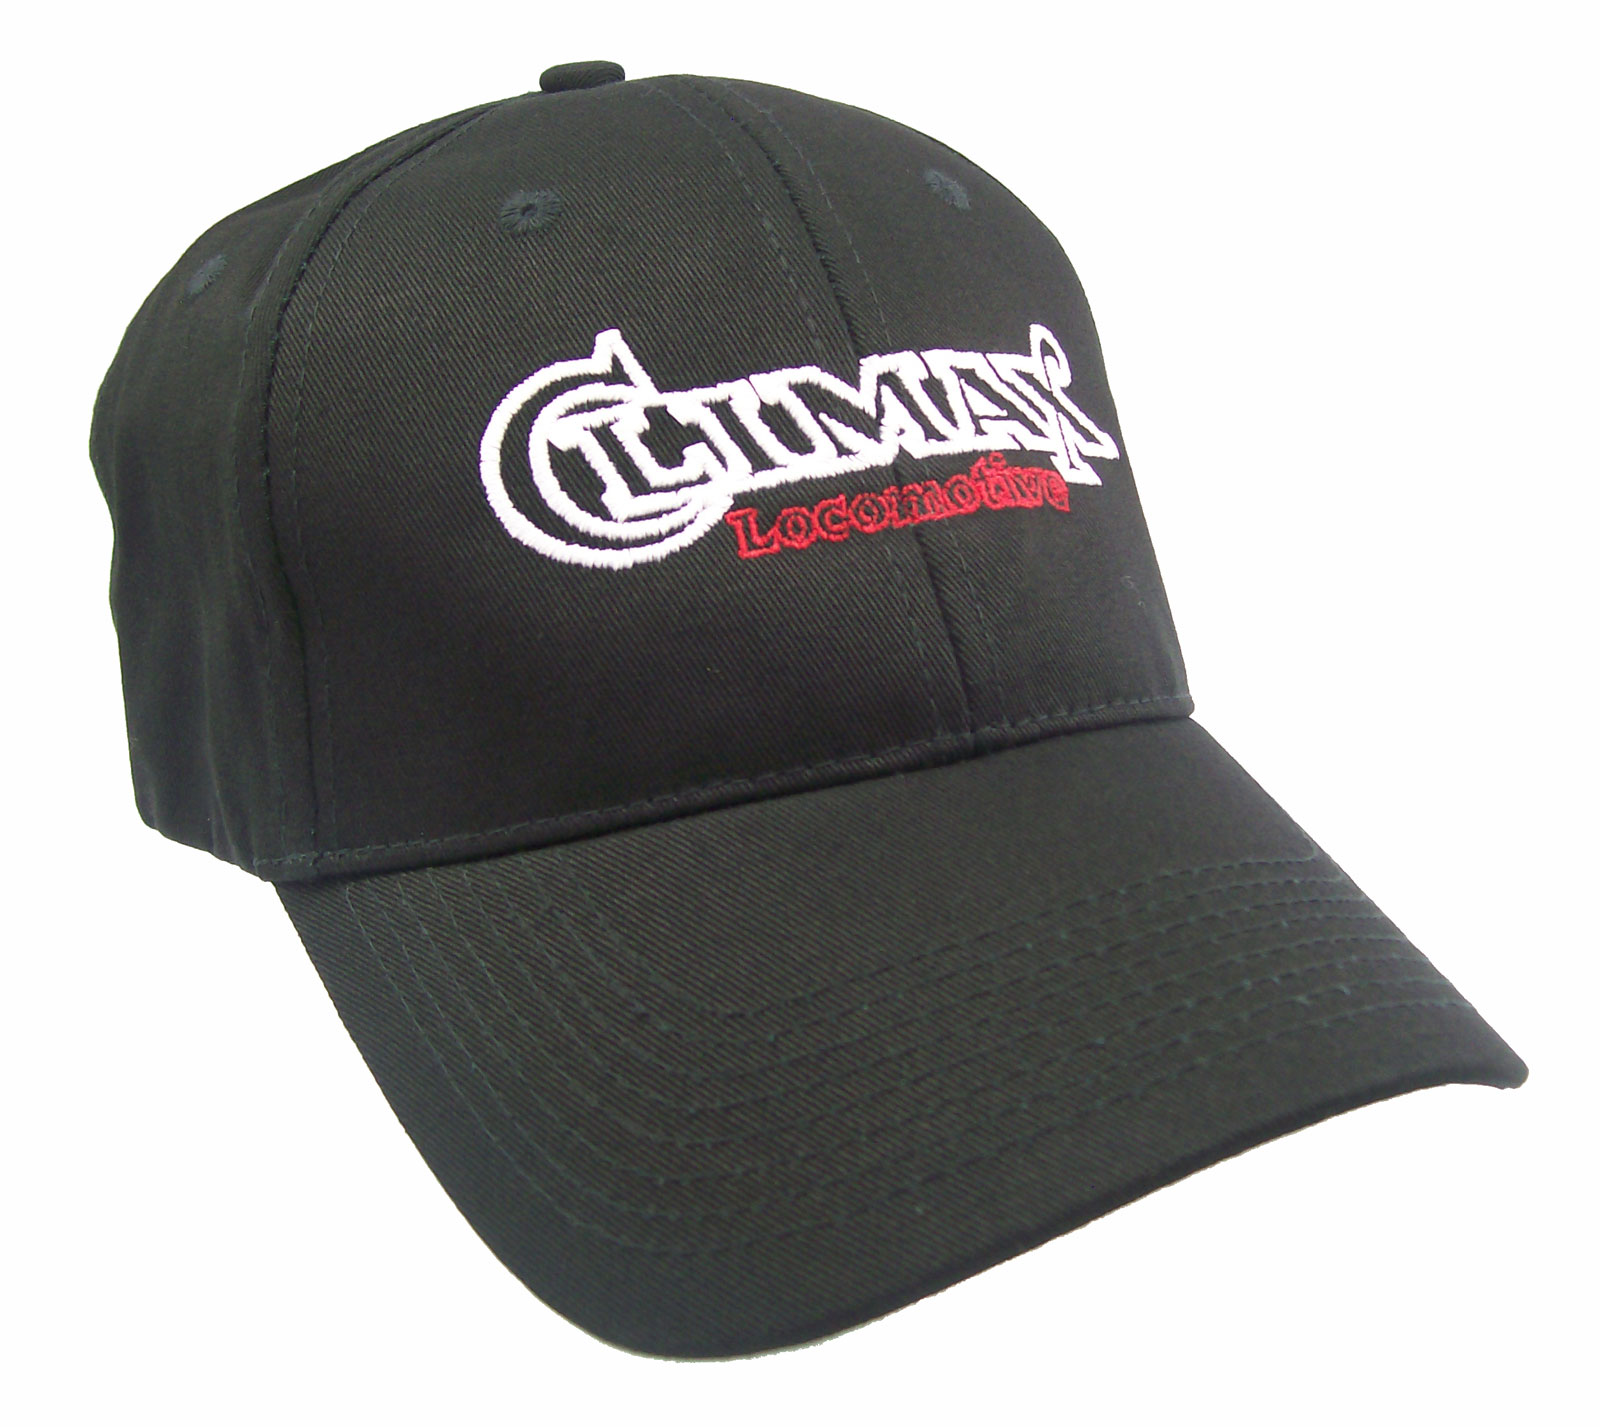 Climax Locomotive Embroidered Cap Made in USA #50-4400US - Locomotive Logos